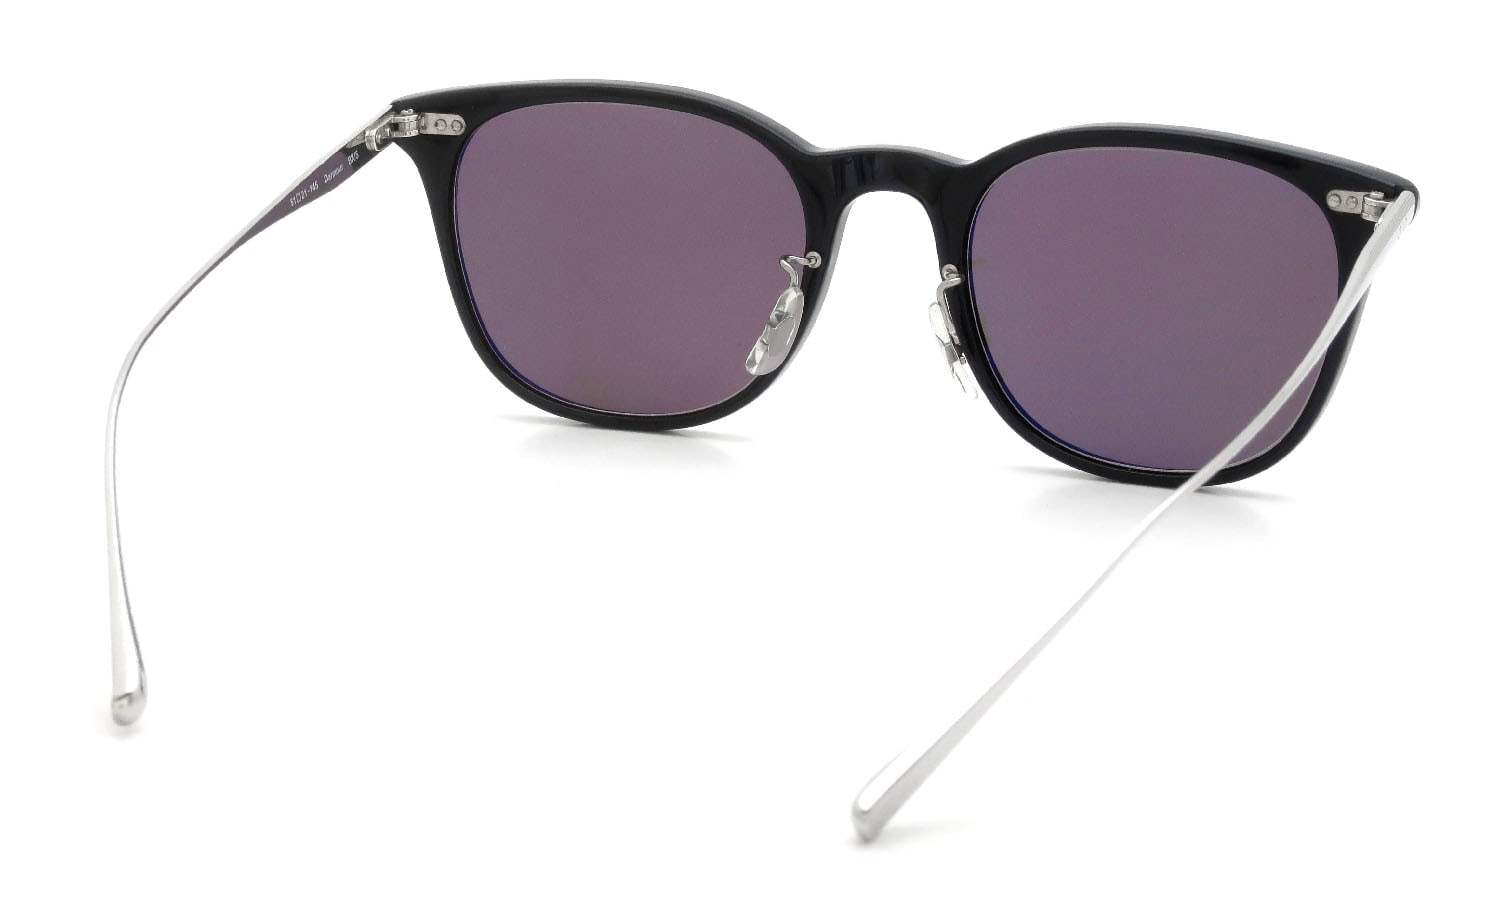 OLIVER PEOPLES Darmour BK/S #001